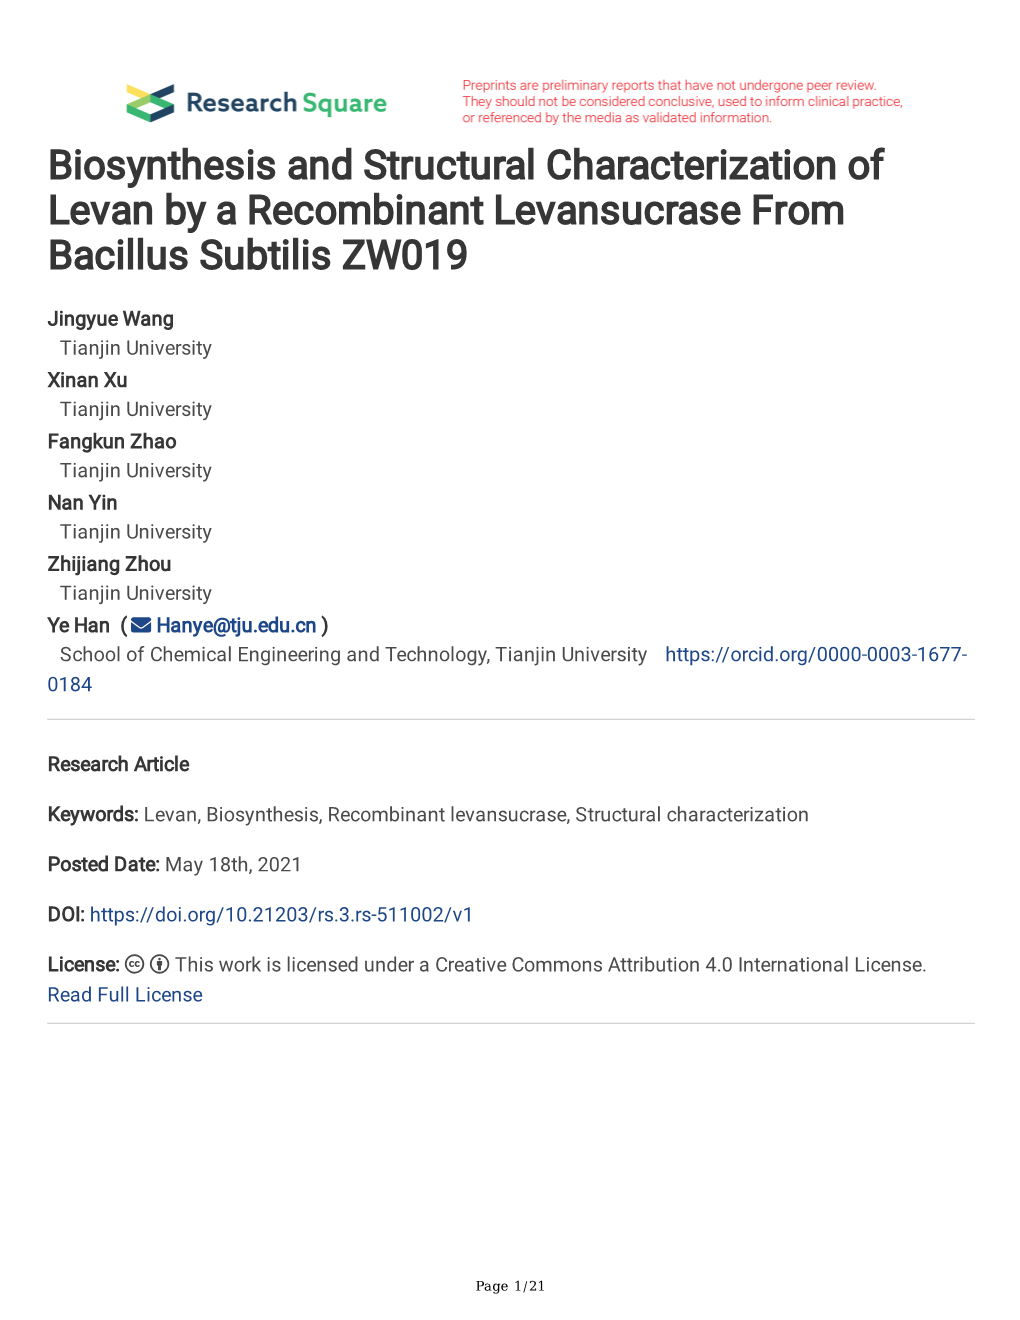 Biosynthesis and Structural Characterization of Levan by a Recombinant Levansucrase from Bacillus Subtilis ZW019